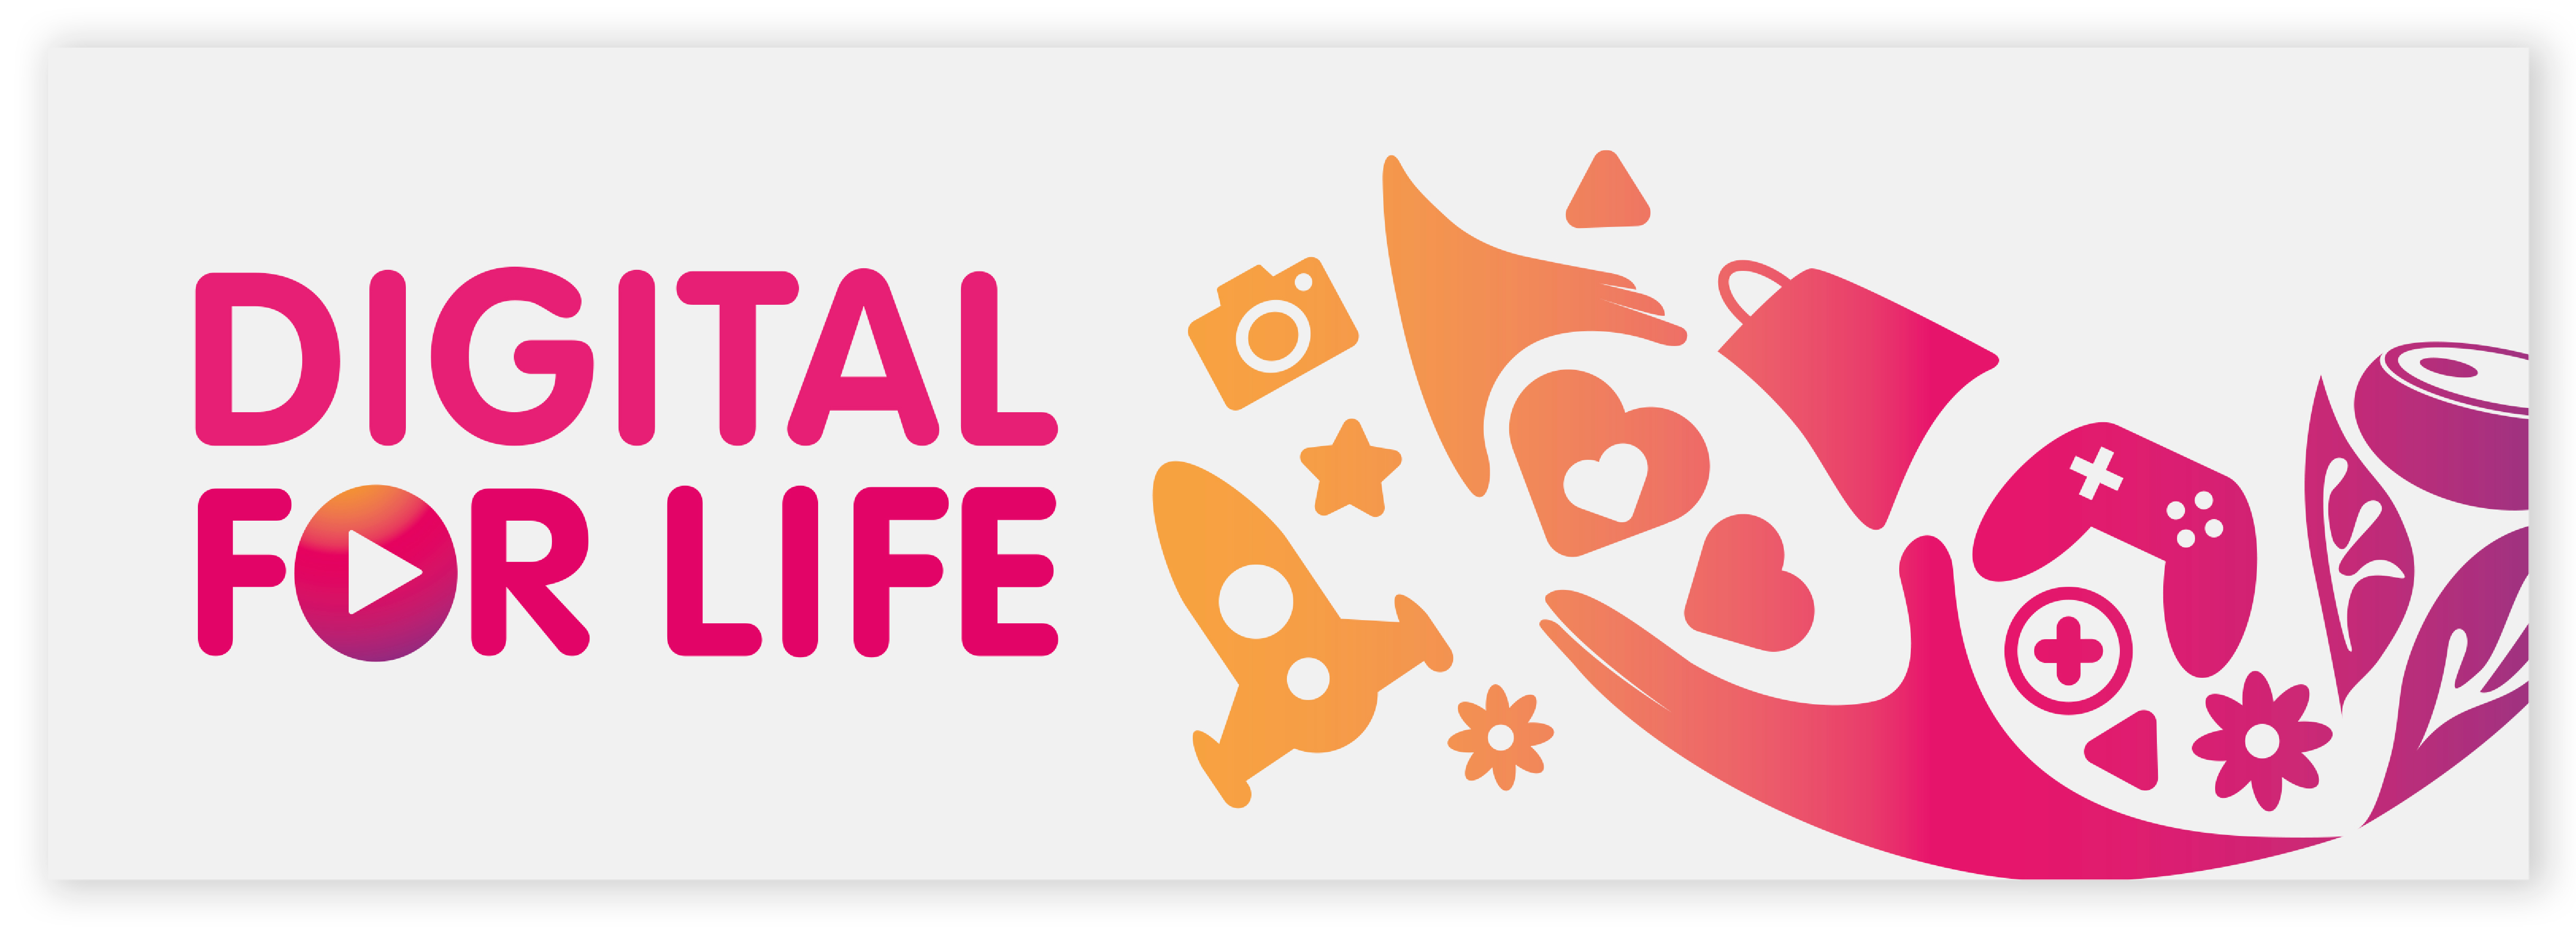 A banner with the Digital for Life logo